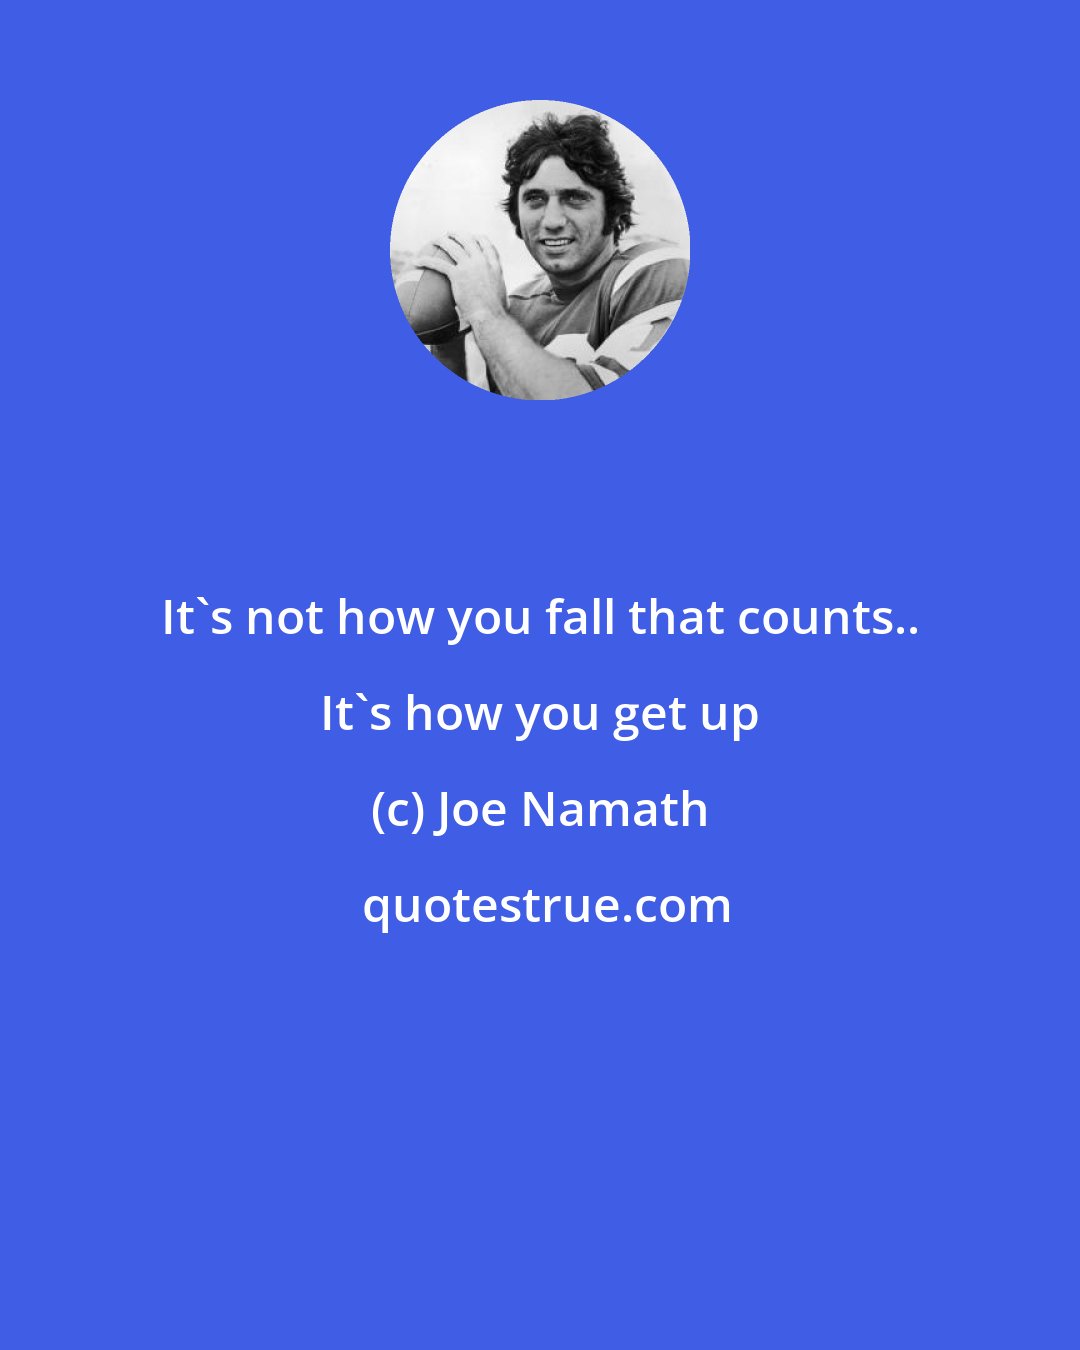 Joe Namath: It's not how you fall that counts.. It's how you get up